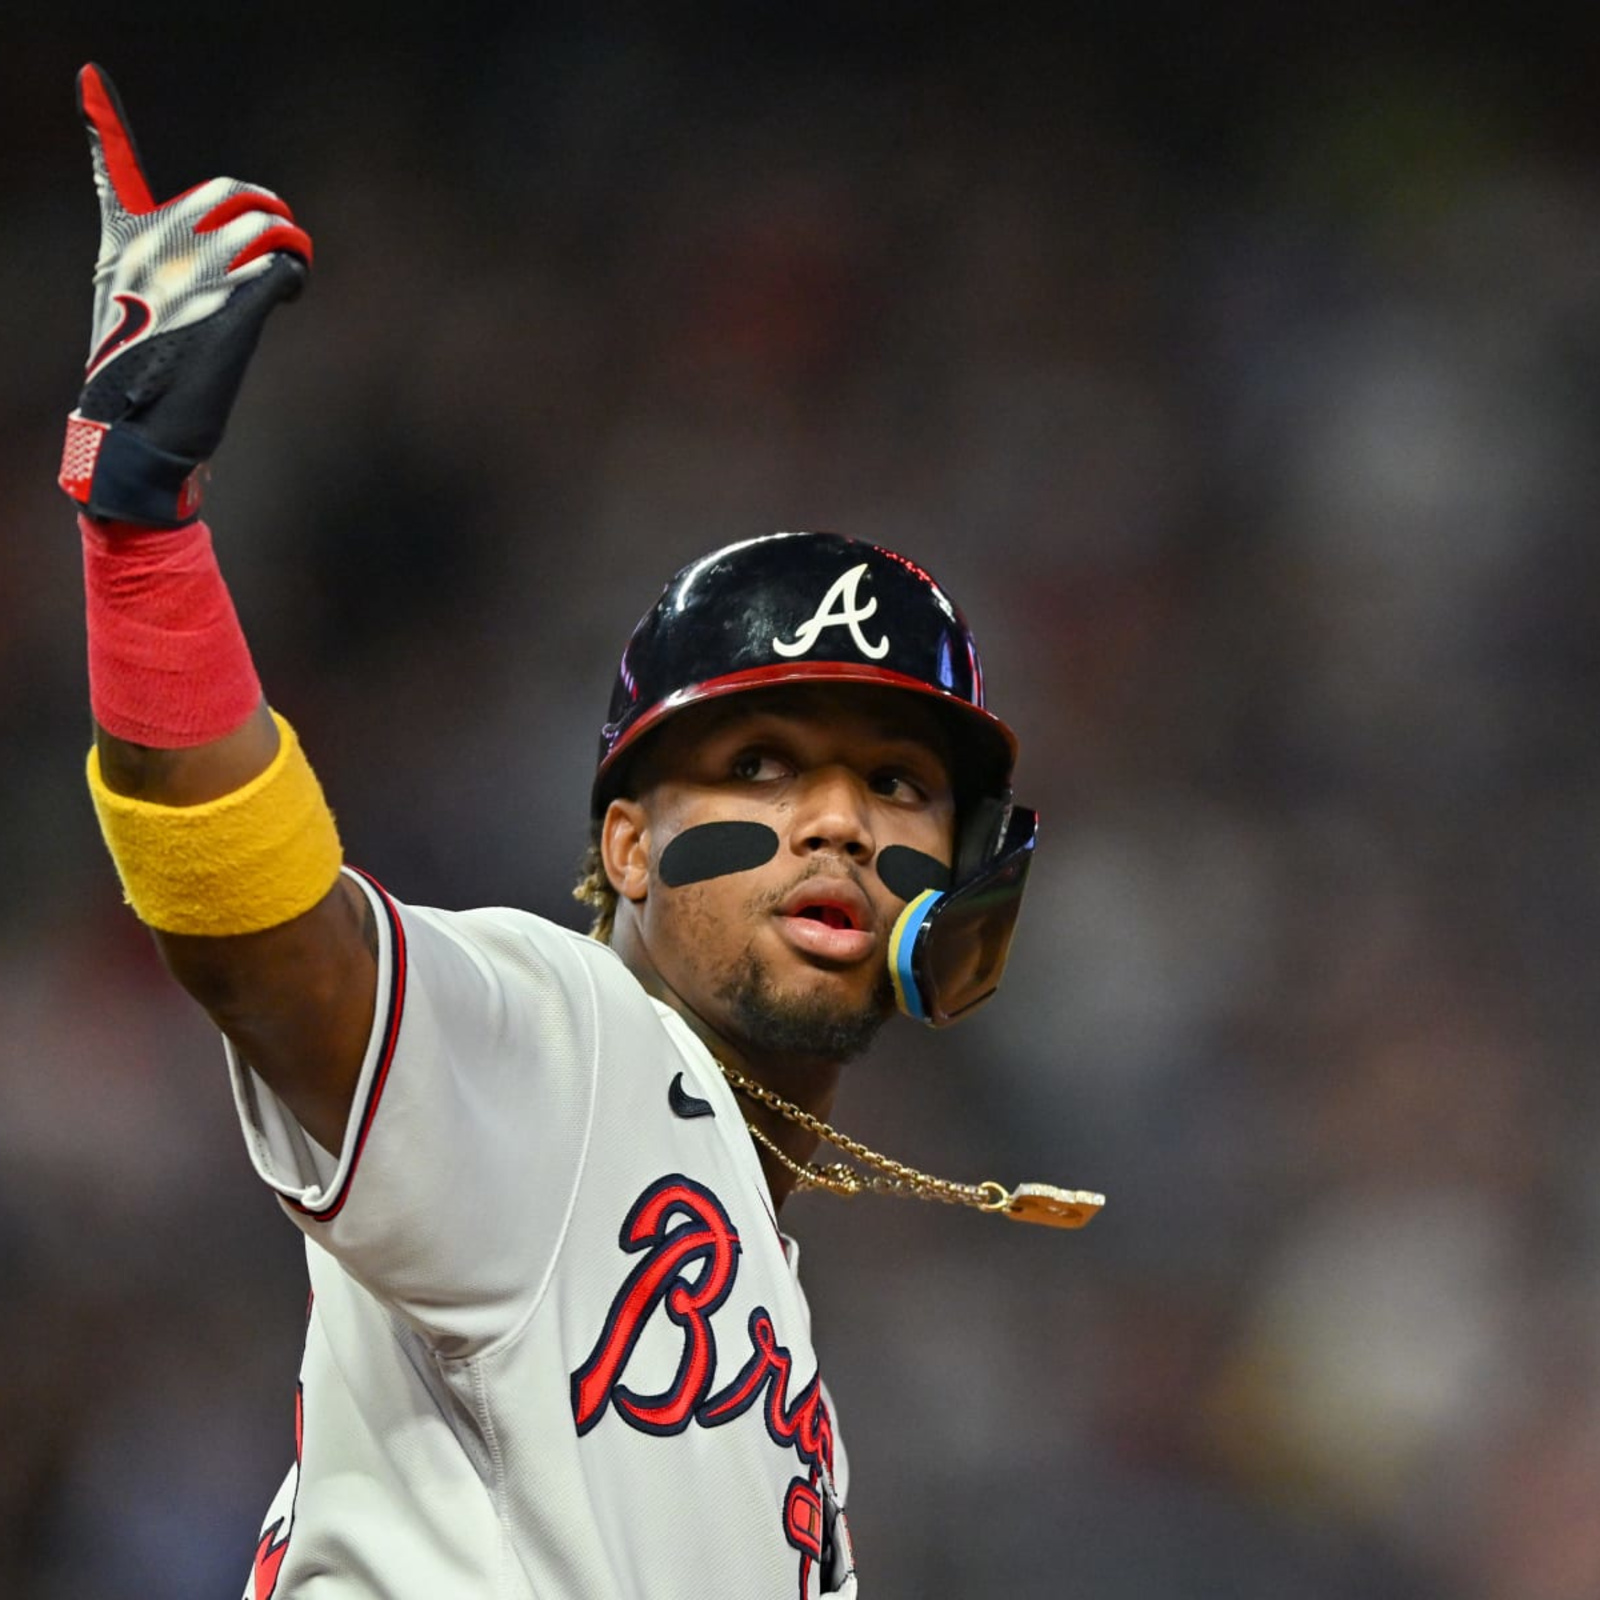 Ronald Acuña Jr. is the No. 1 Player Right Now